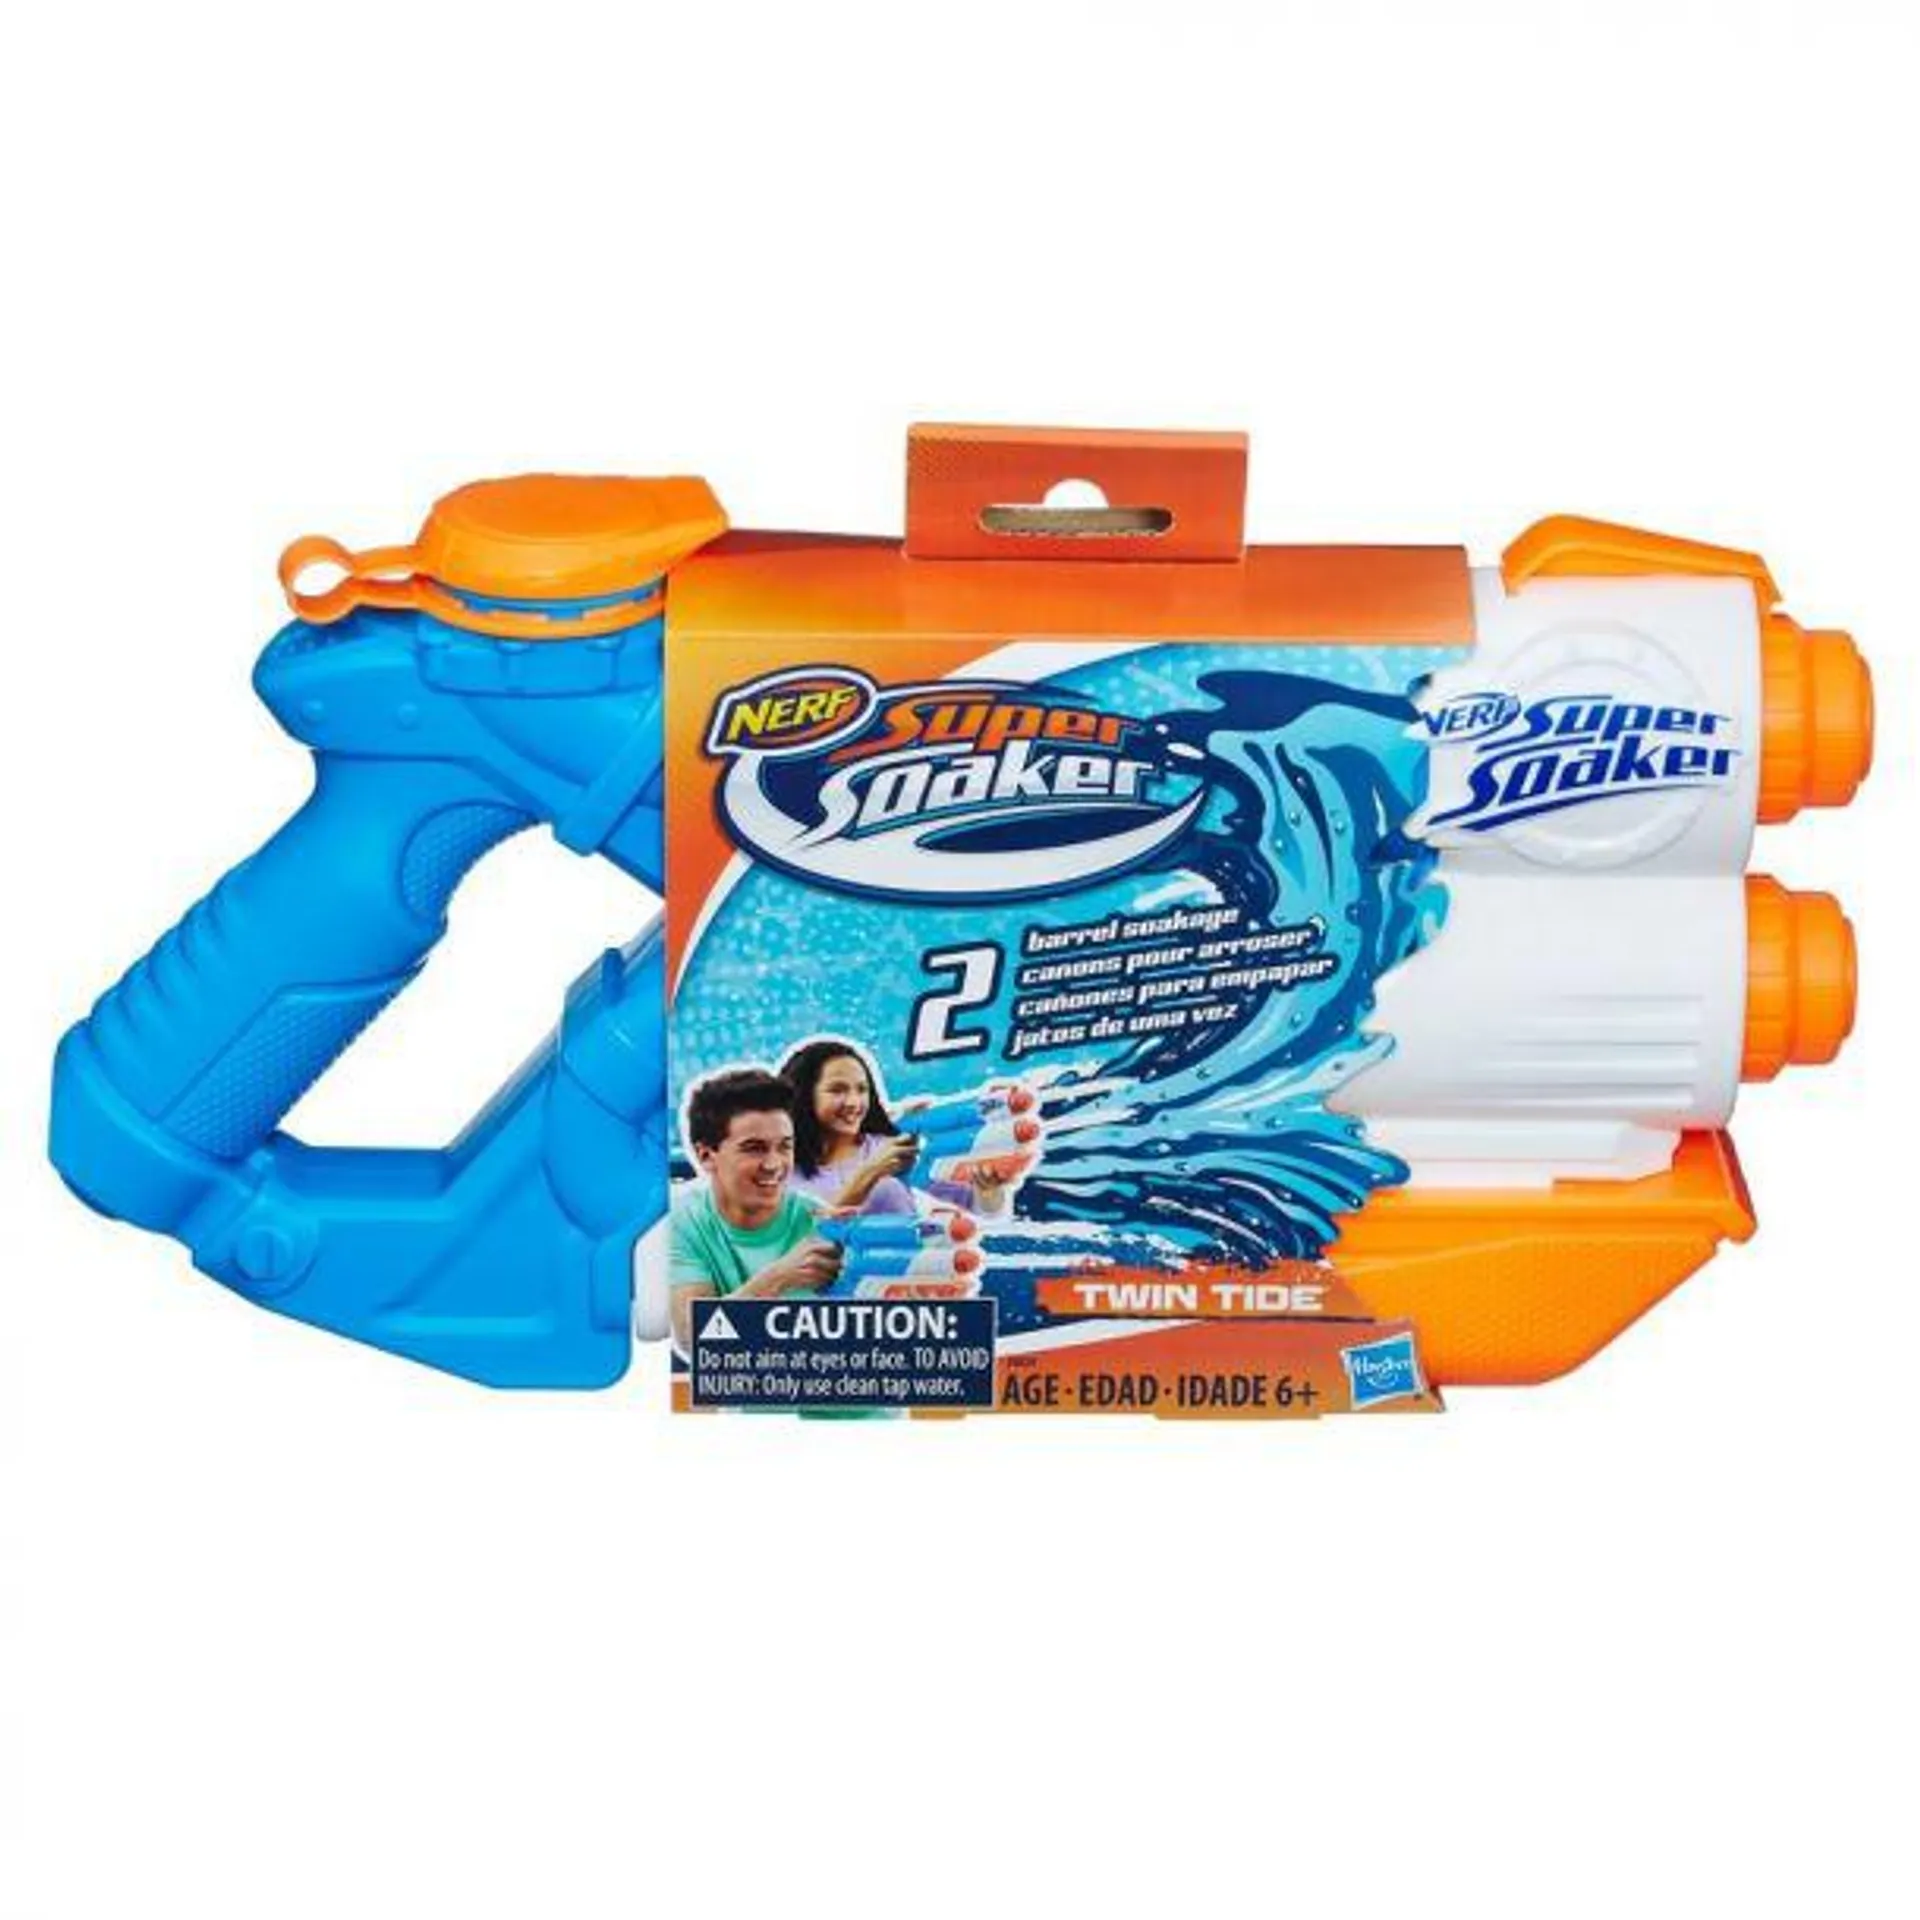 Nerf Super Soaker 14.4" Twin Tide Water Blaster with one water blaster - Multicolor